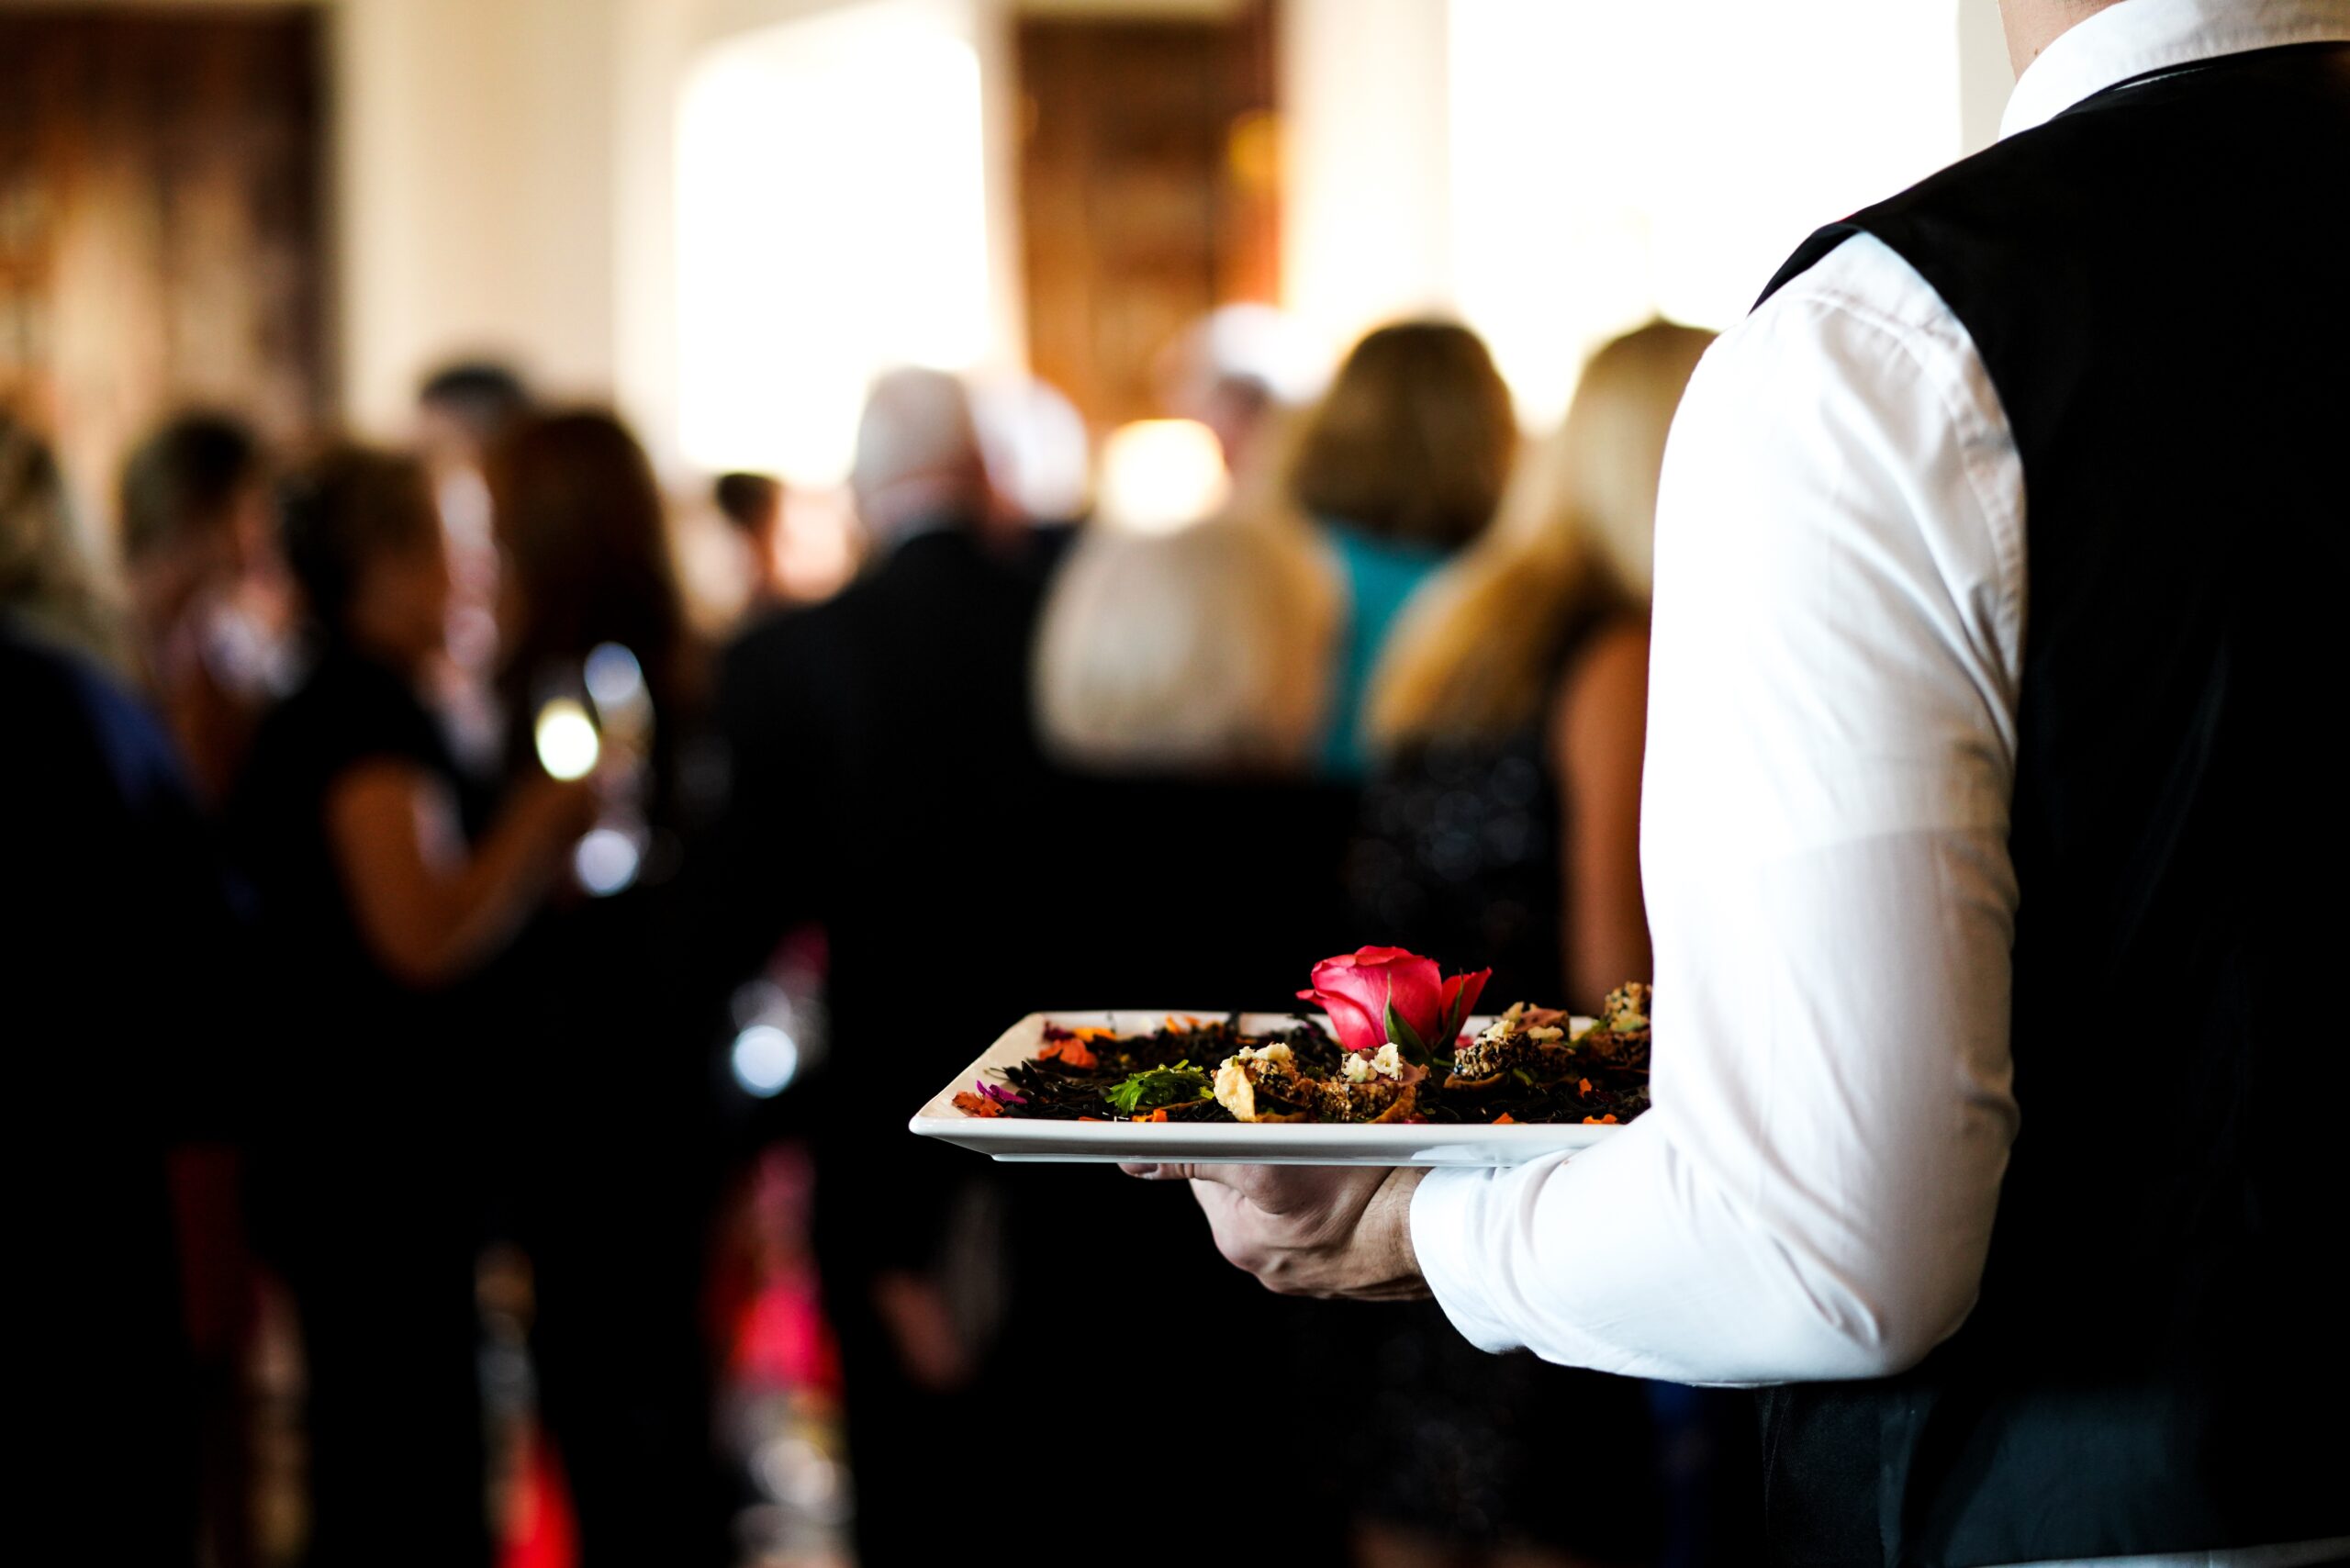 A closeup shot of a waiter's arm carrying a plate of a dish with a pink rose in it